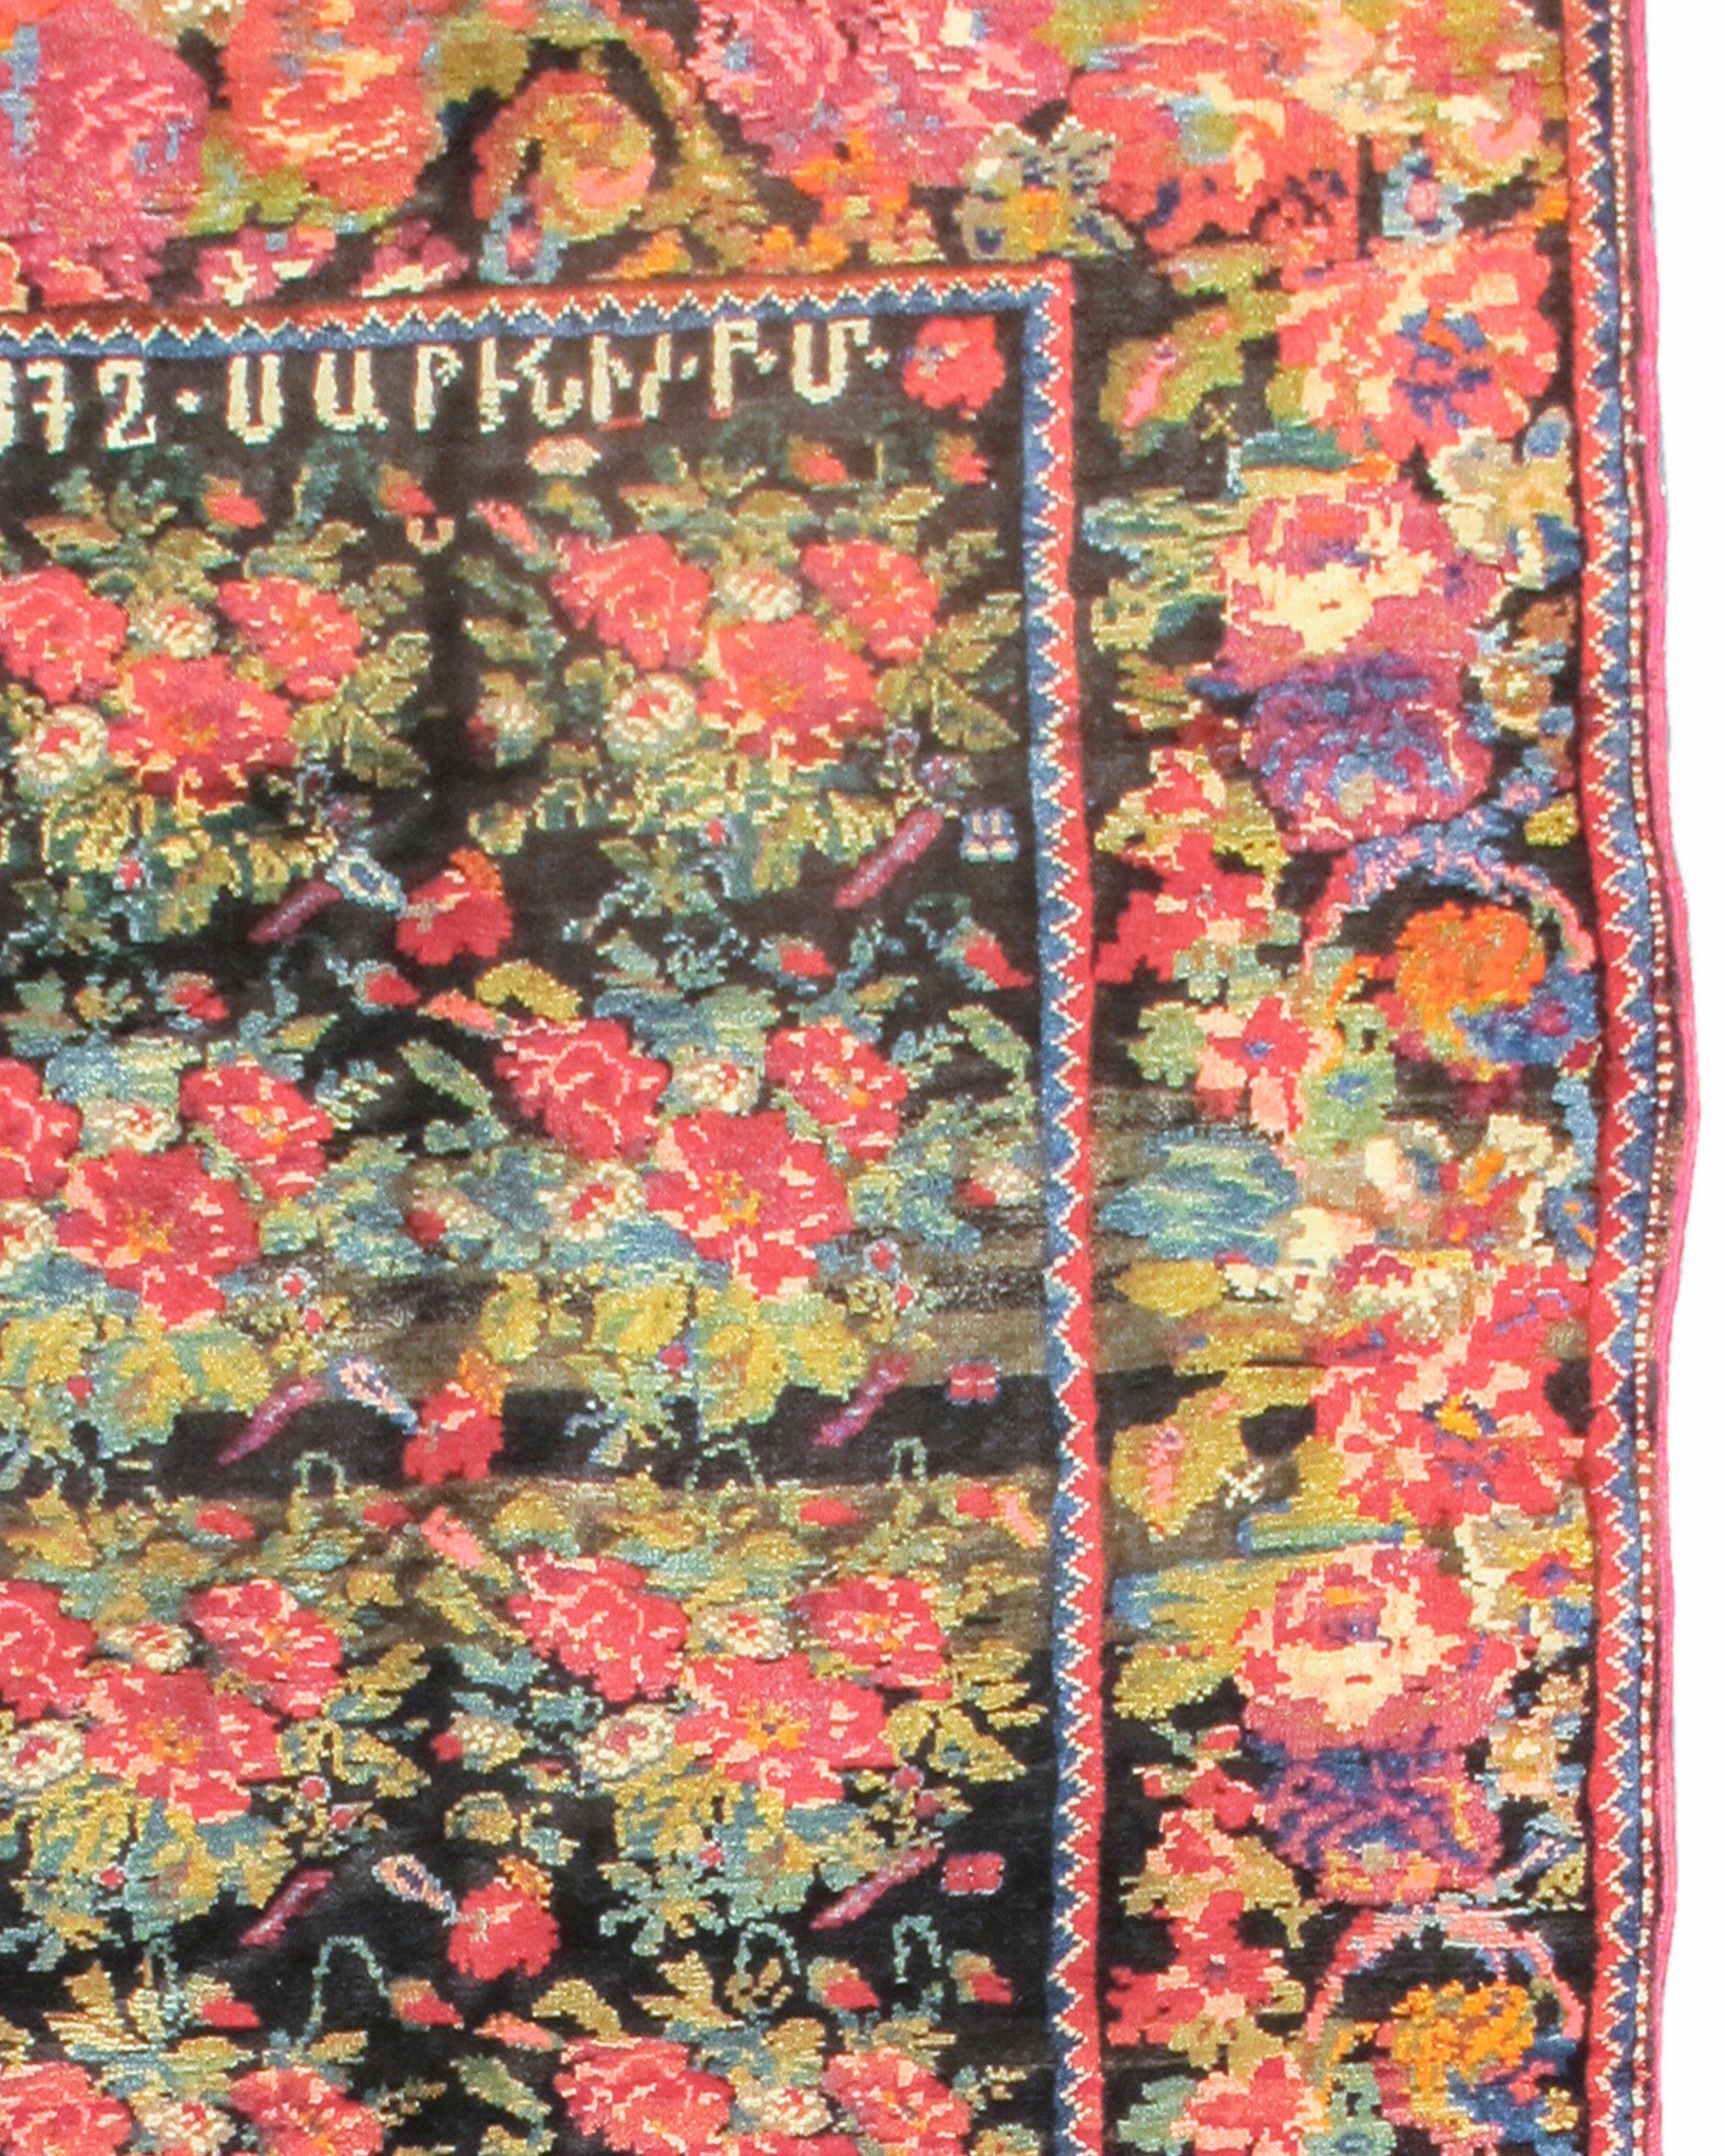 Antique Caucasian Karabagh Rug, Early 20th Century

Additional Information:
Dimensions: 4'4